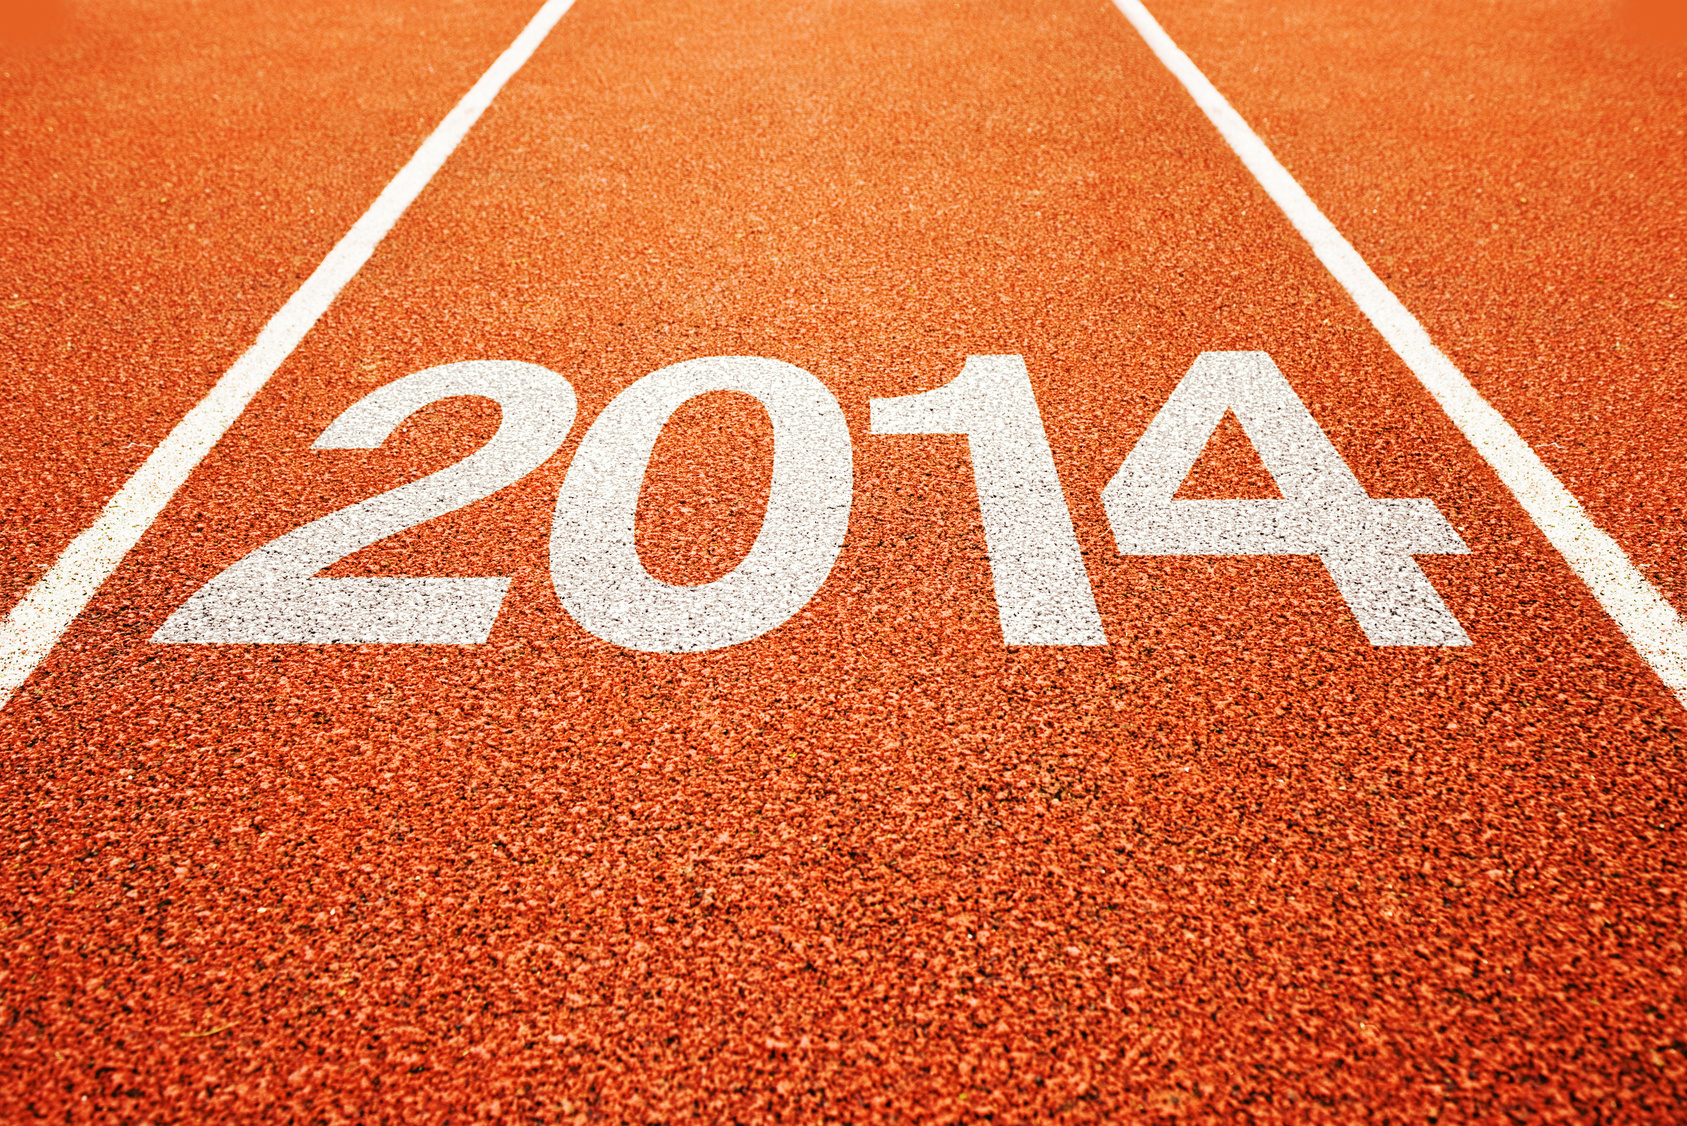 Tech Predictions for 2014